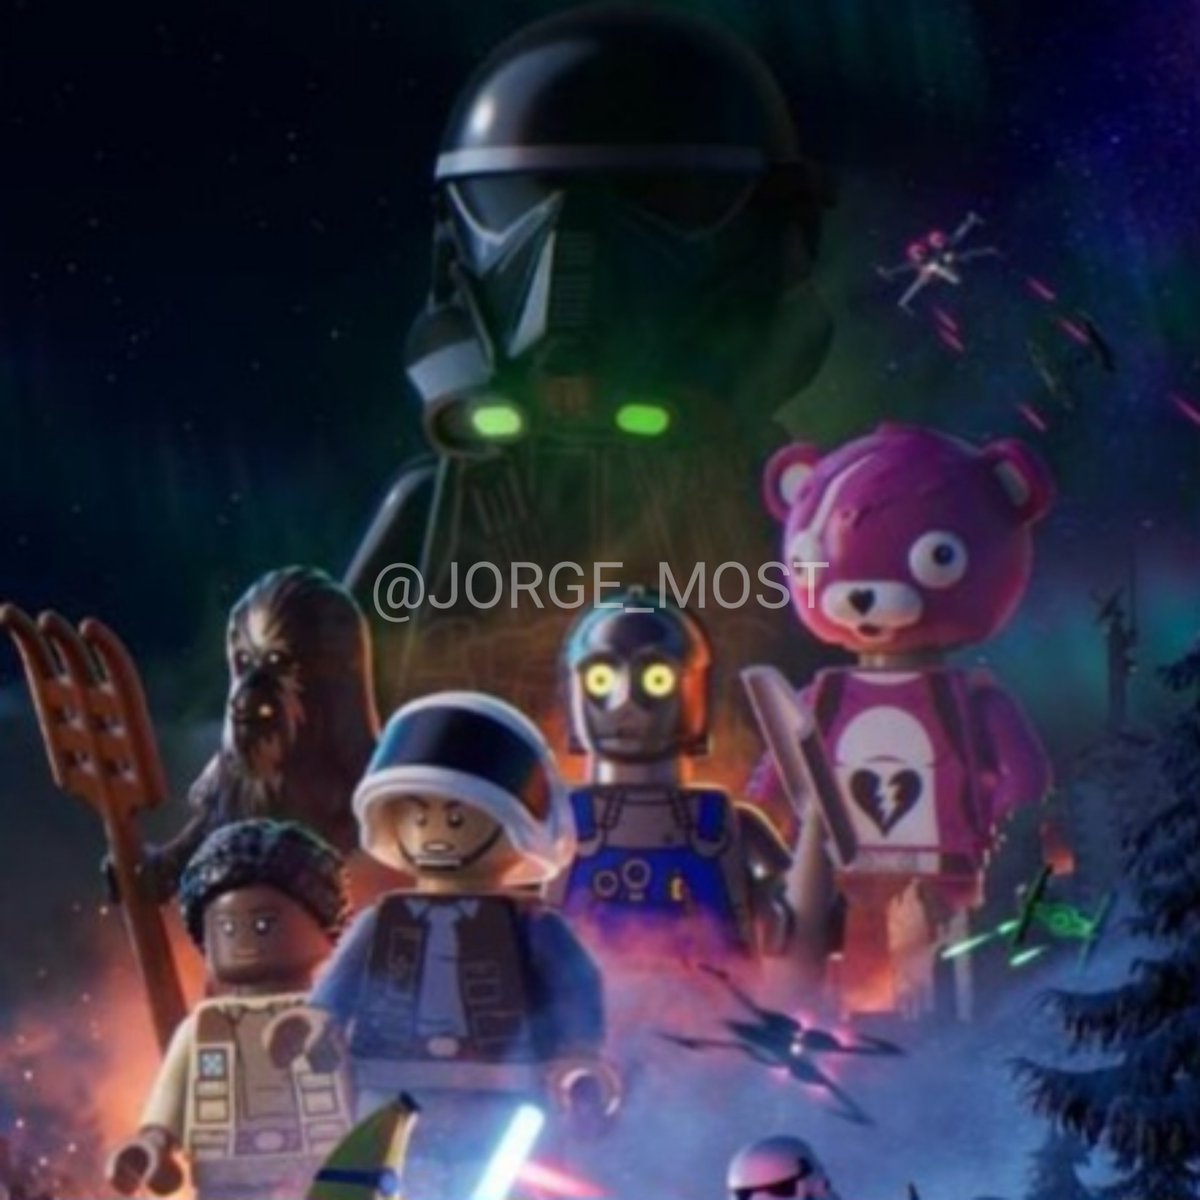 FORTNITE X LEGO STAR WARS DIALOGUE TEASERS 🔥 (Thanks to @FN_Assist for the big help!) - 'Bright suns! Um, I mean, the sun sure is bright! Why did I say it that way...?' - 'Do you ever think about what life is like in the other galaxies out there?' - 'SHHHNG! WRRRN! ZZZNG!' -